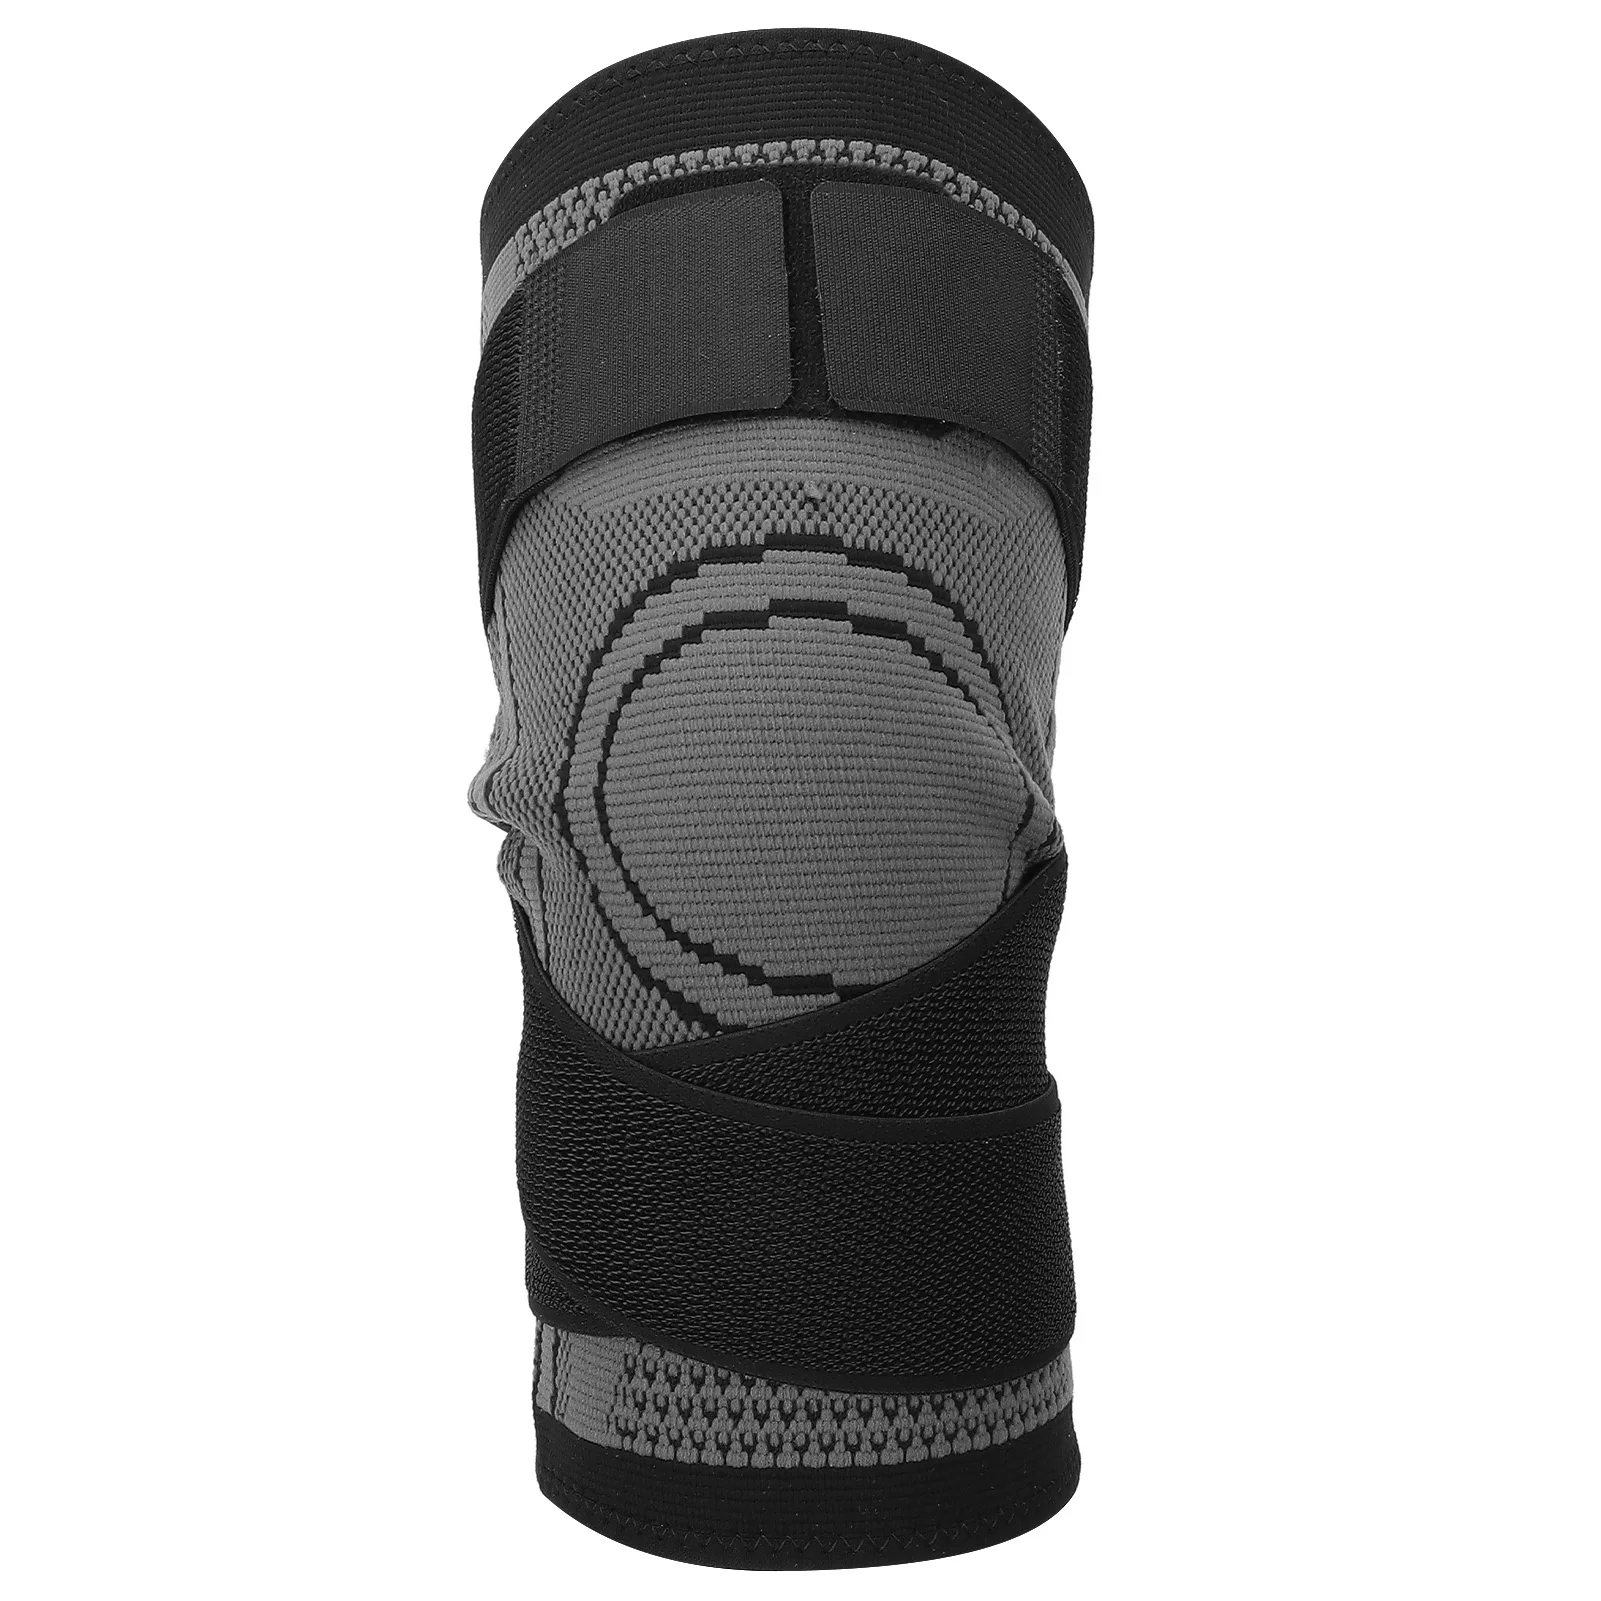 

Sports Knee Pads Prevent Injury Tight Fit Keep Warm Provide Muscle Support Knee Care Pad for Running Tennis